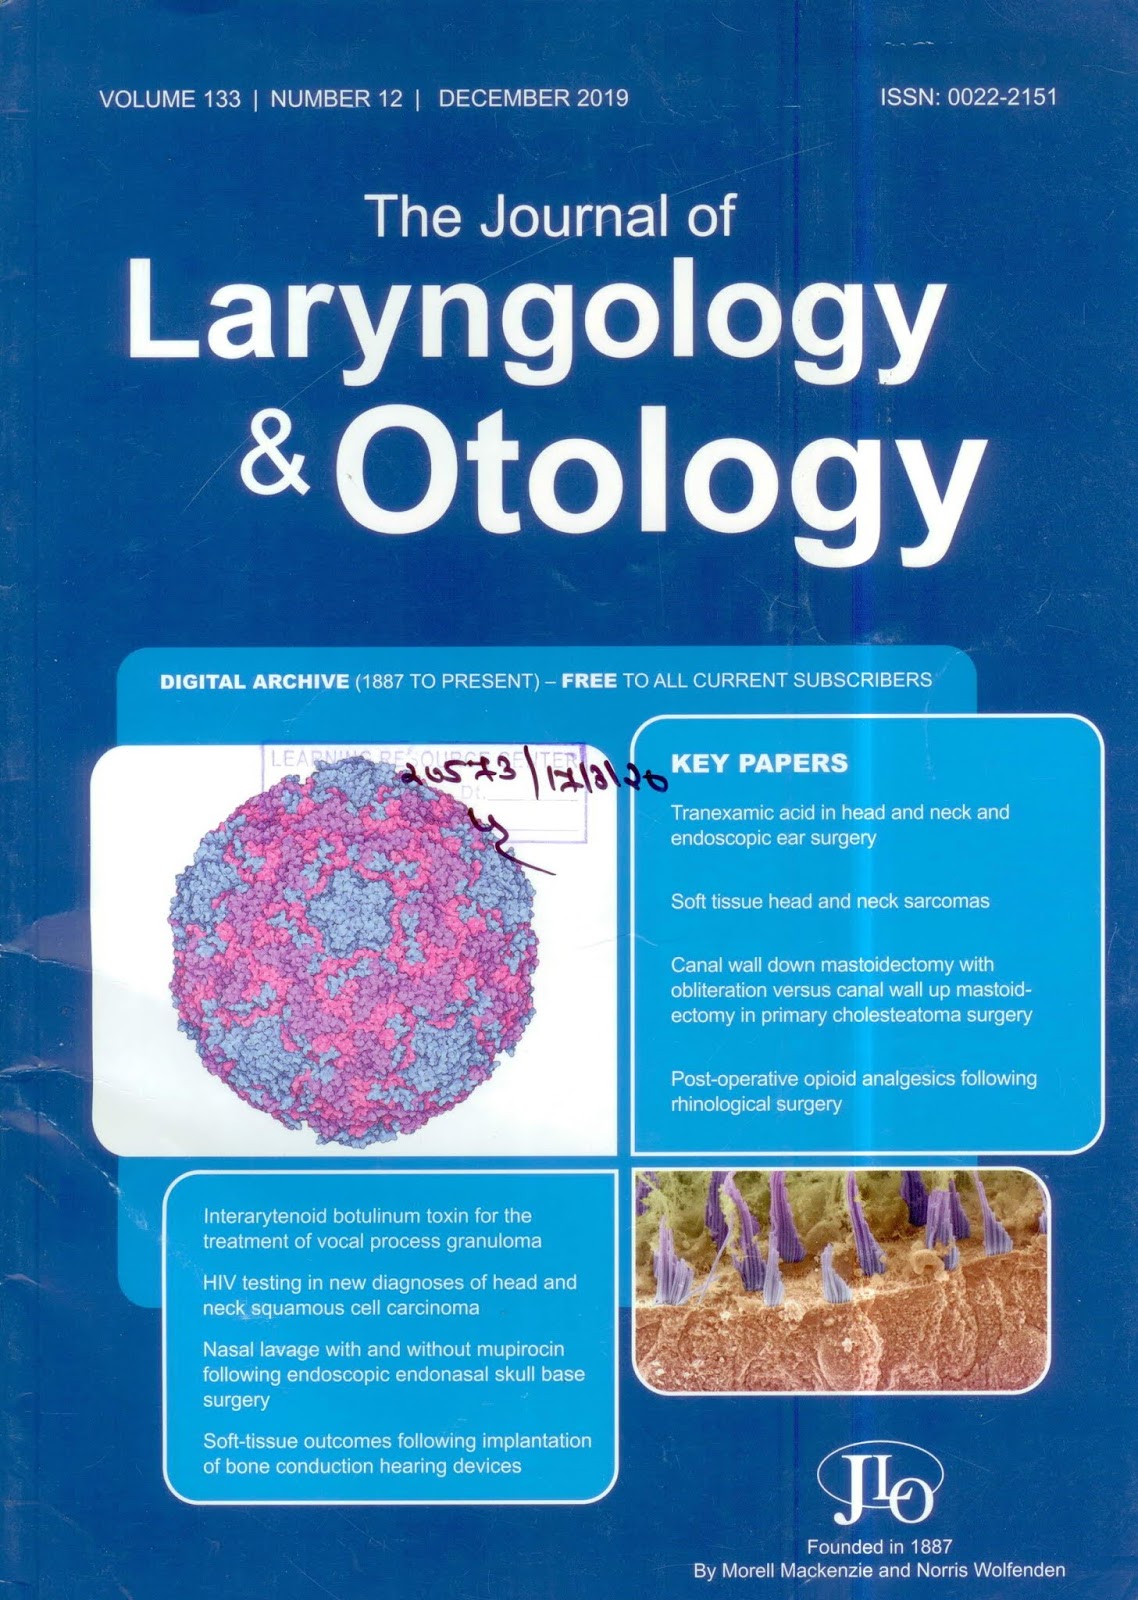 https://www.cambridge.org/core/journals/journal-of-laryngology-and-otology/issue/8EB3D9FA37017064E872E0706C5818CD